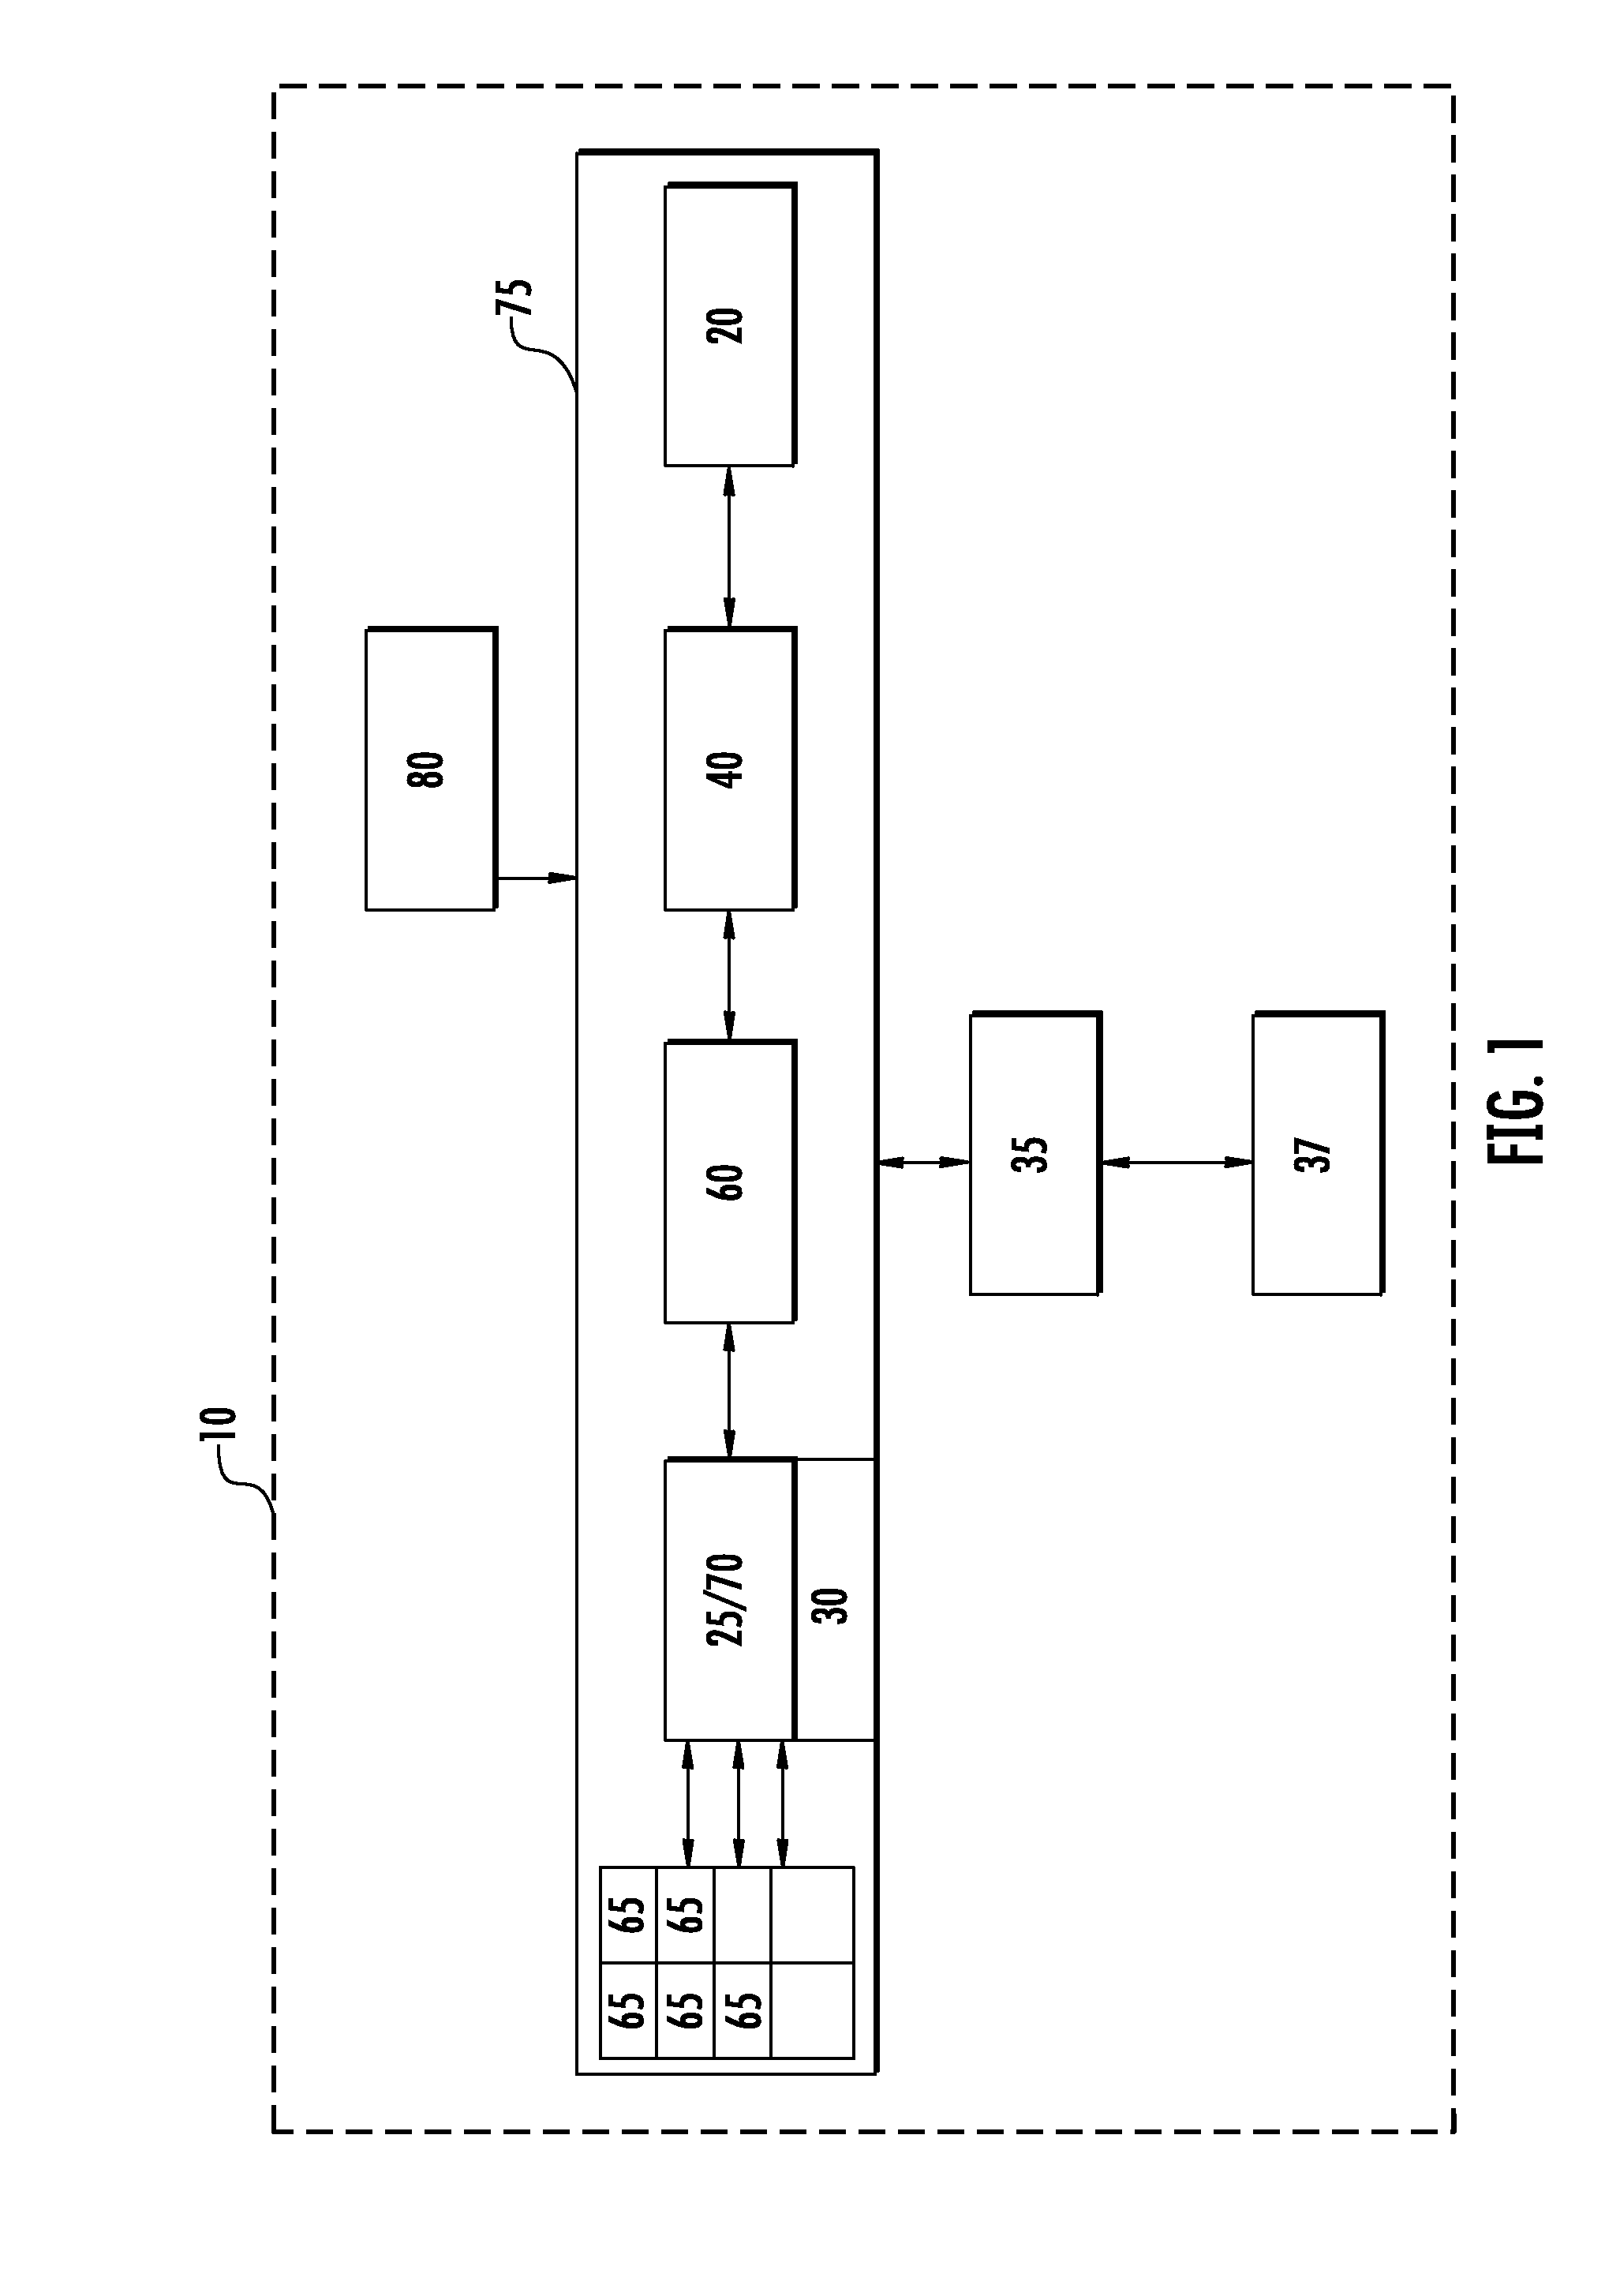 Steerable phase array antenna RFID tag locater and tracking system and methods